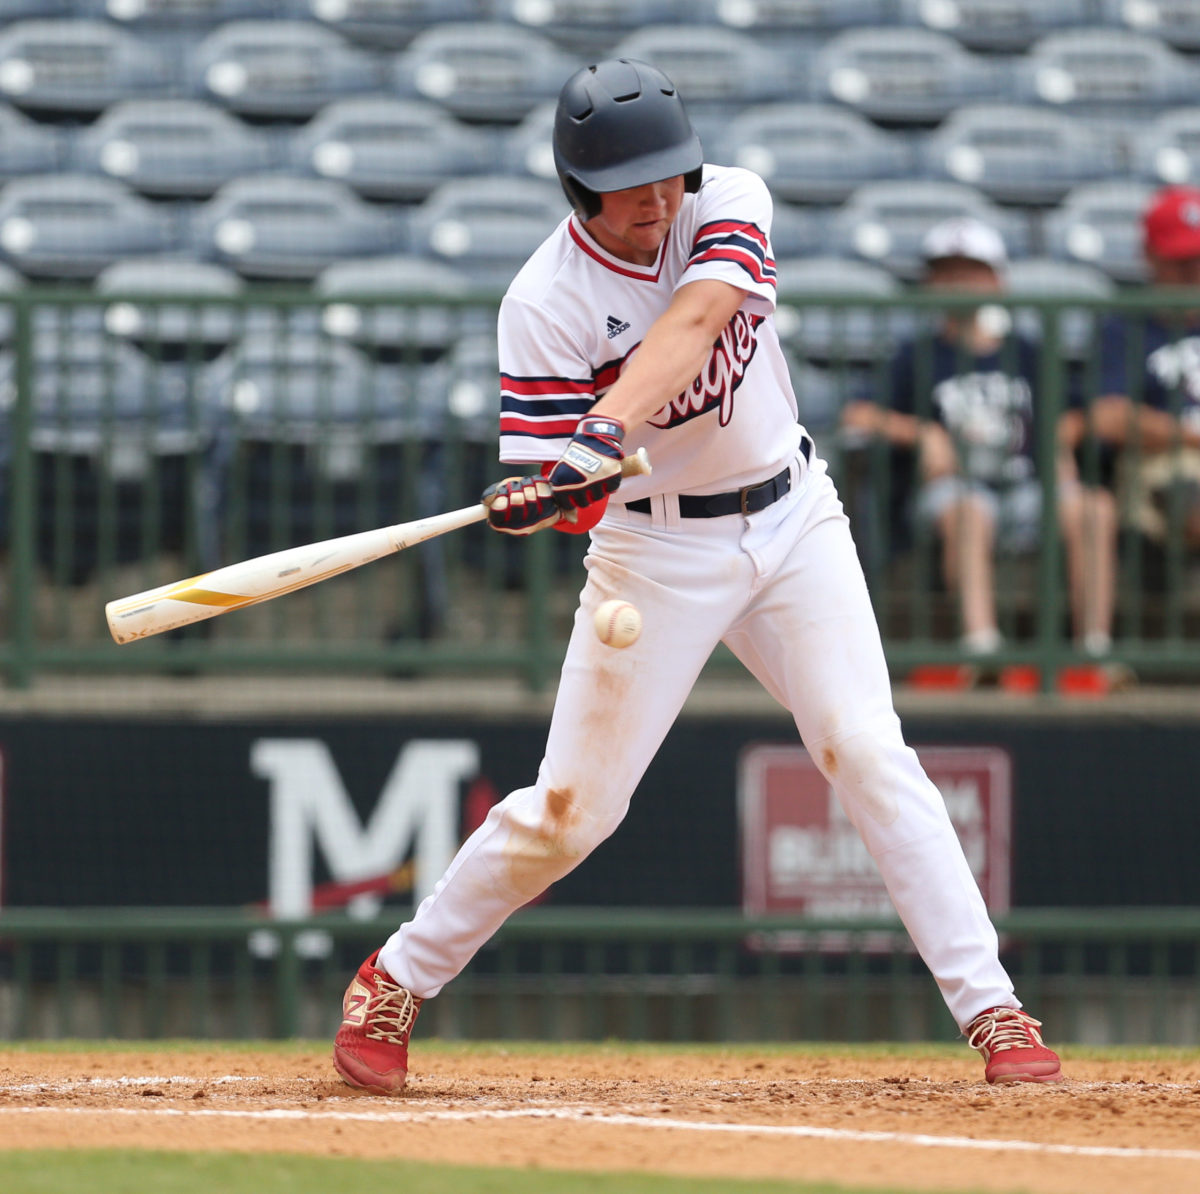 Tupelo Christian's Cooper Davis (33) swings at a pitch. Tupelo Christian and Resurrection played in game 1 of the MHSAA Class 1A Baseball Championship on Tuesday, June 1, 2021 at Trustmark Park. Photo by Keith Warren